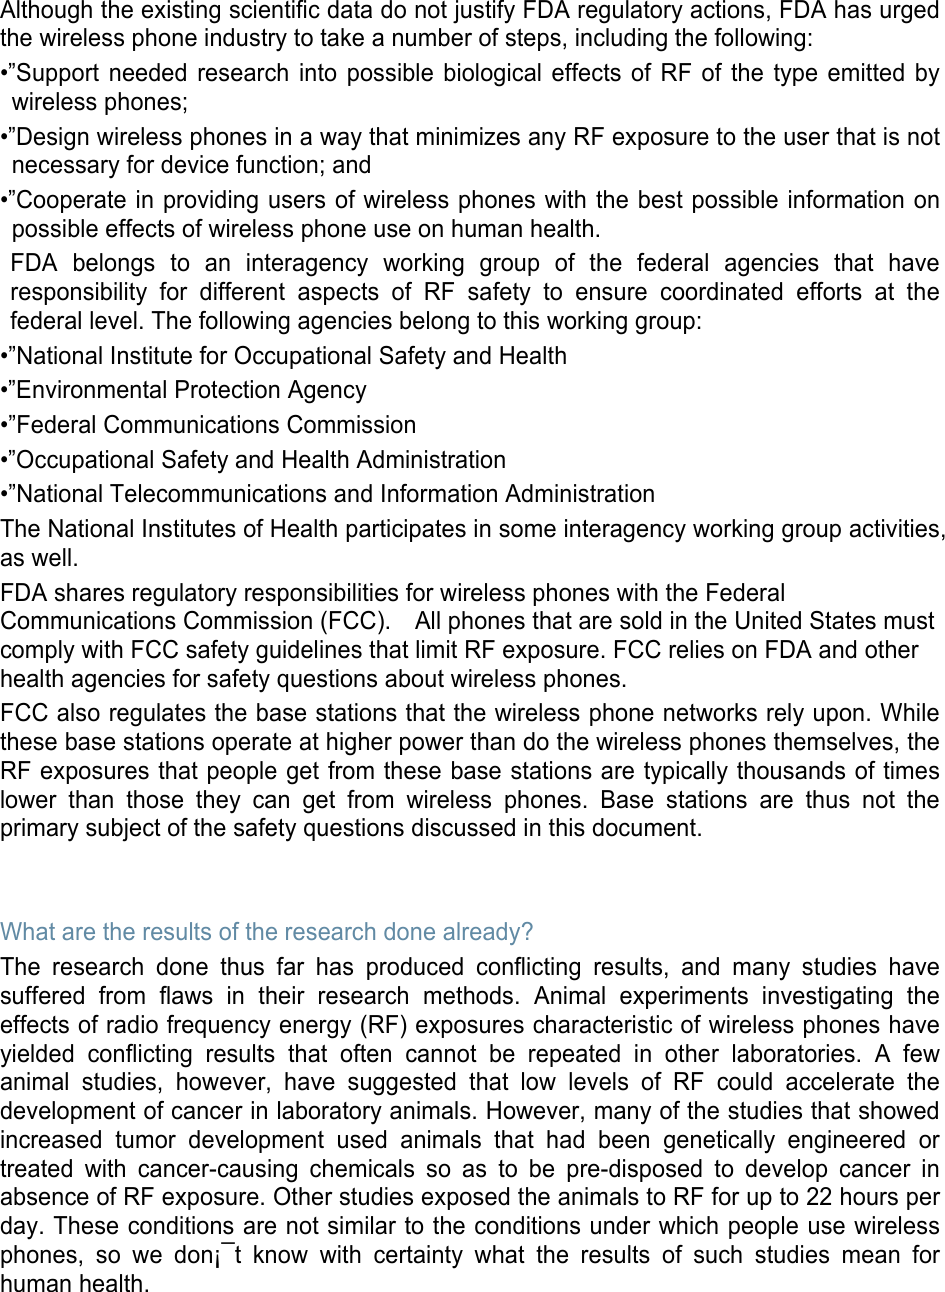 Although the existing scientific data do not justify FDA regulatory actions, FDA has urged the wireless phone industry to take a number of steps, including the following: •”Support needed research into possible biological effects of RF of the type emitted by wireless phones; •”Design wireless phones in a way that minimizes any RF exposure to the user that is not necessary for device function; and •”Cooperate in providing users of wireless phones with the best possible information on possible effects of wireless phone use on human health. FDA belongs to an interagency working group of the federal agencies that have responsibility for different aspects of RF safety to ensure coordinated efforts at the federal level. The following agencies belong to this working group: •”National Institute for Occupational Safety and Health •”Environmental Protection Agency •”Federal Communications Commission •”Occupational Safety and Health Administration •”National Telecommunications and Information Administration The National Institutes of Health participates in some interagency working group activities, as well. FDA shares regulatory responsibilities for wireless phones with the Federal Communications Commission (FCC).    All phones that are sold in the United States must comply with FCC safety guidelines that limit RF exposure. FCC relies on FDA and other health agencies for safety questions about wireless phones. FCC also regulates the base stations that the wireless phone networks rely upon. While these base stations operate at higher power than do the wireless phones themselves, the RF exposures that people get from these base stations are typically thousands of times lower than those they can get from wireless phones. Base stations are thus not the primary subject of the safety questions discussed in this document.   What are the results of the research done already? The research done thus far has produced conflicting results, and many studies have suffered from flaws in their research methods. Animal experiments investigating the effects of radio frequency energy (RF) exposures characteristic of wireless phones have yielded conflicting results that often cannot be repeated in other laboratories. A few animal studies, however, have suggested that low levels of RF could accelerate the development of cancer in laboratory animals. However, many of the studies that showed increased tumor development used animals that had been genetically engineered or treated with cancer-causing chemicals so as to be pre-disposed to develop cancer in absence of RF exposure. Other studies exposed the animals to RF for up to 22 hours per day. These conditions are not similar to the conditions under which people use wireless phones, so we don¡¯t know with certainty what the results of such studies mean for human health.    